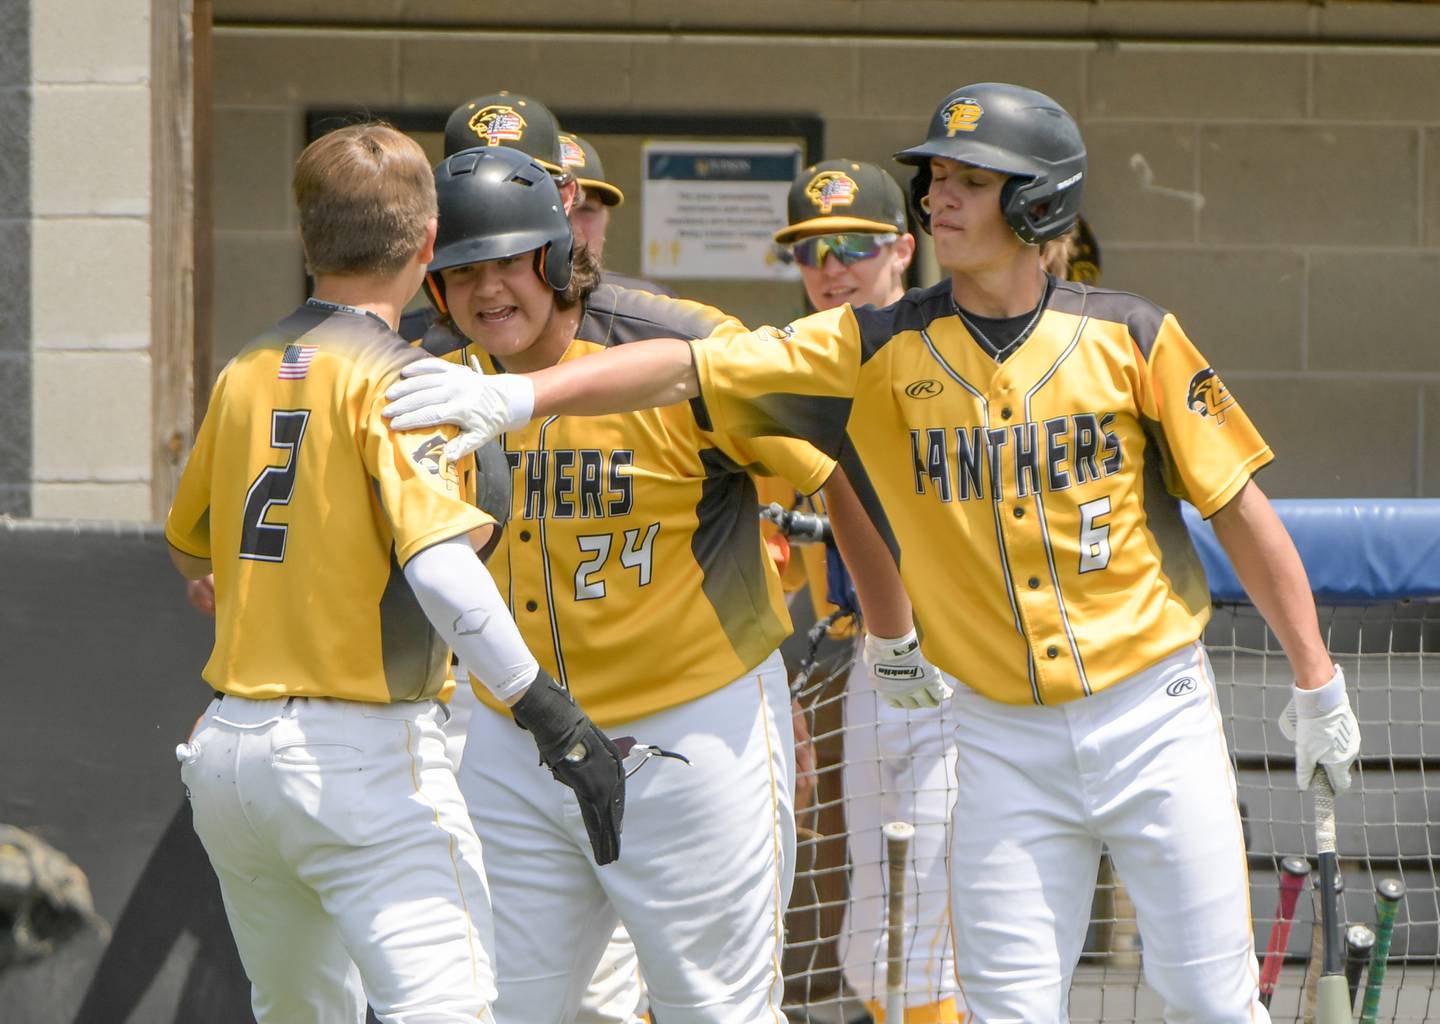 Andrew Pyszka (2) is congratulated by his Putnam County teammates after scoring a run against Marquette during the Class 1A Harvest Christian Sectional at Judson College in Elgin on Saturday, May 28, 2022.